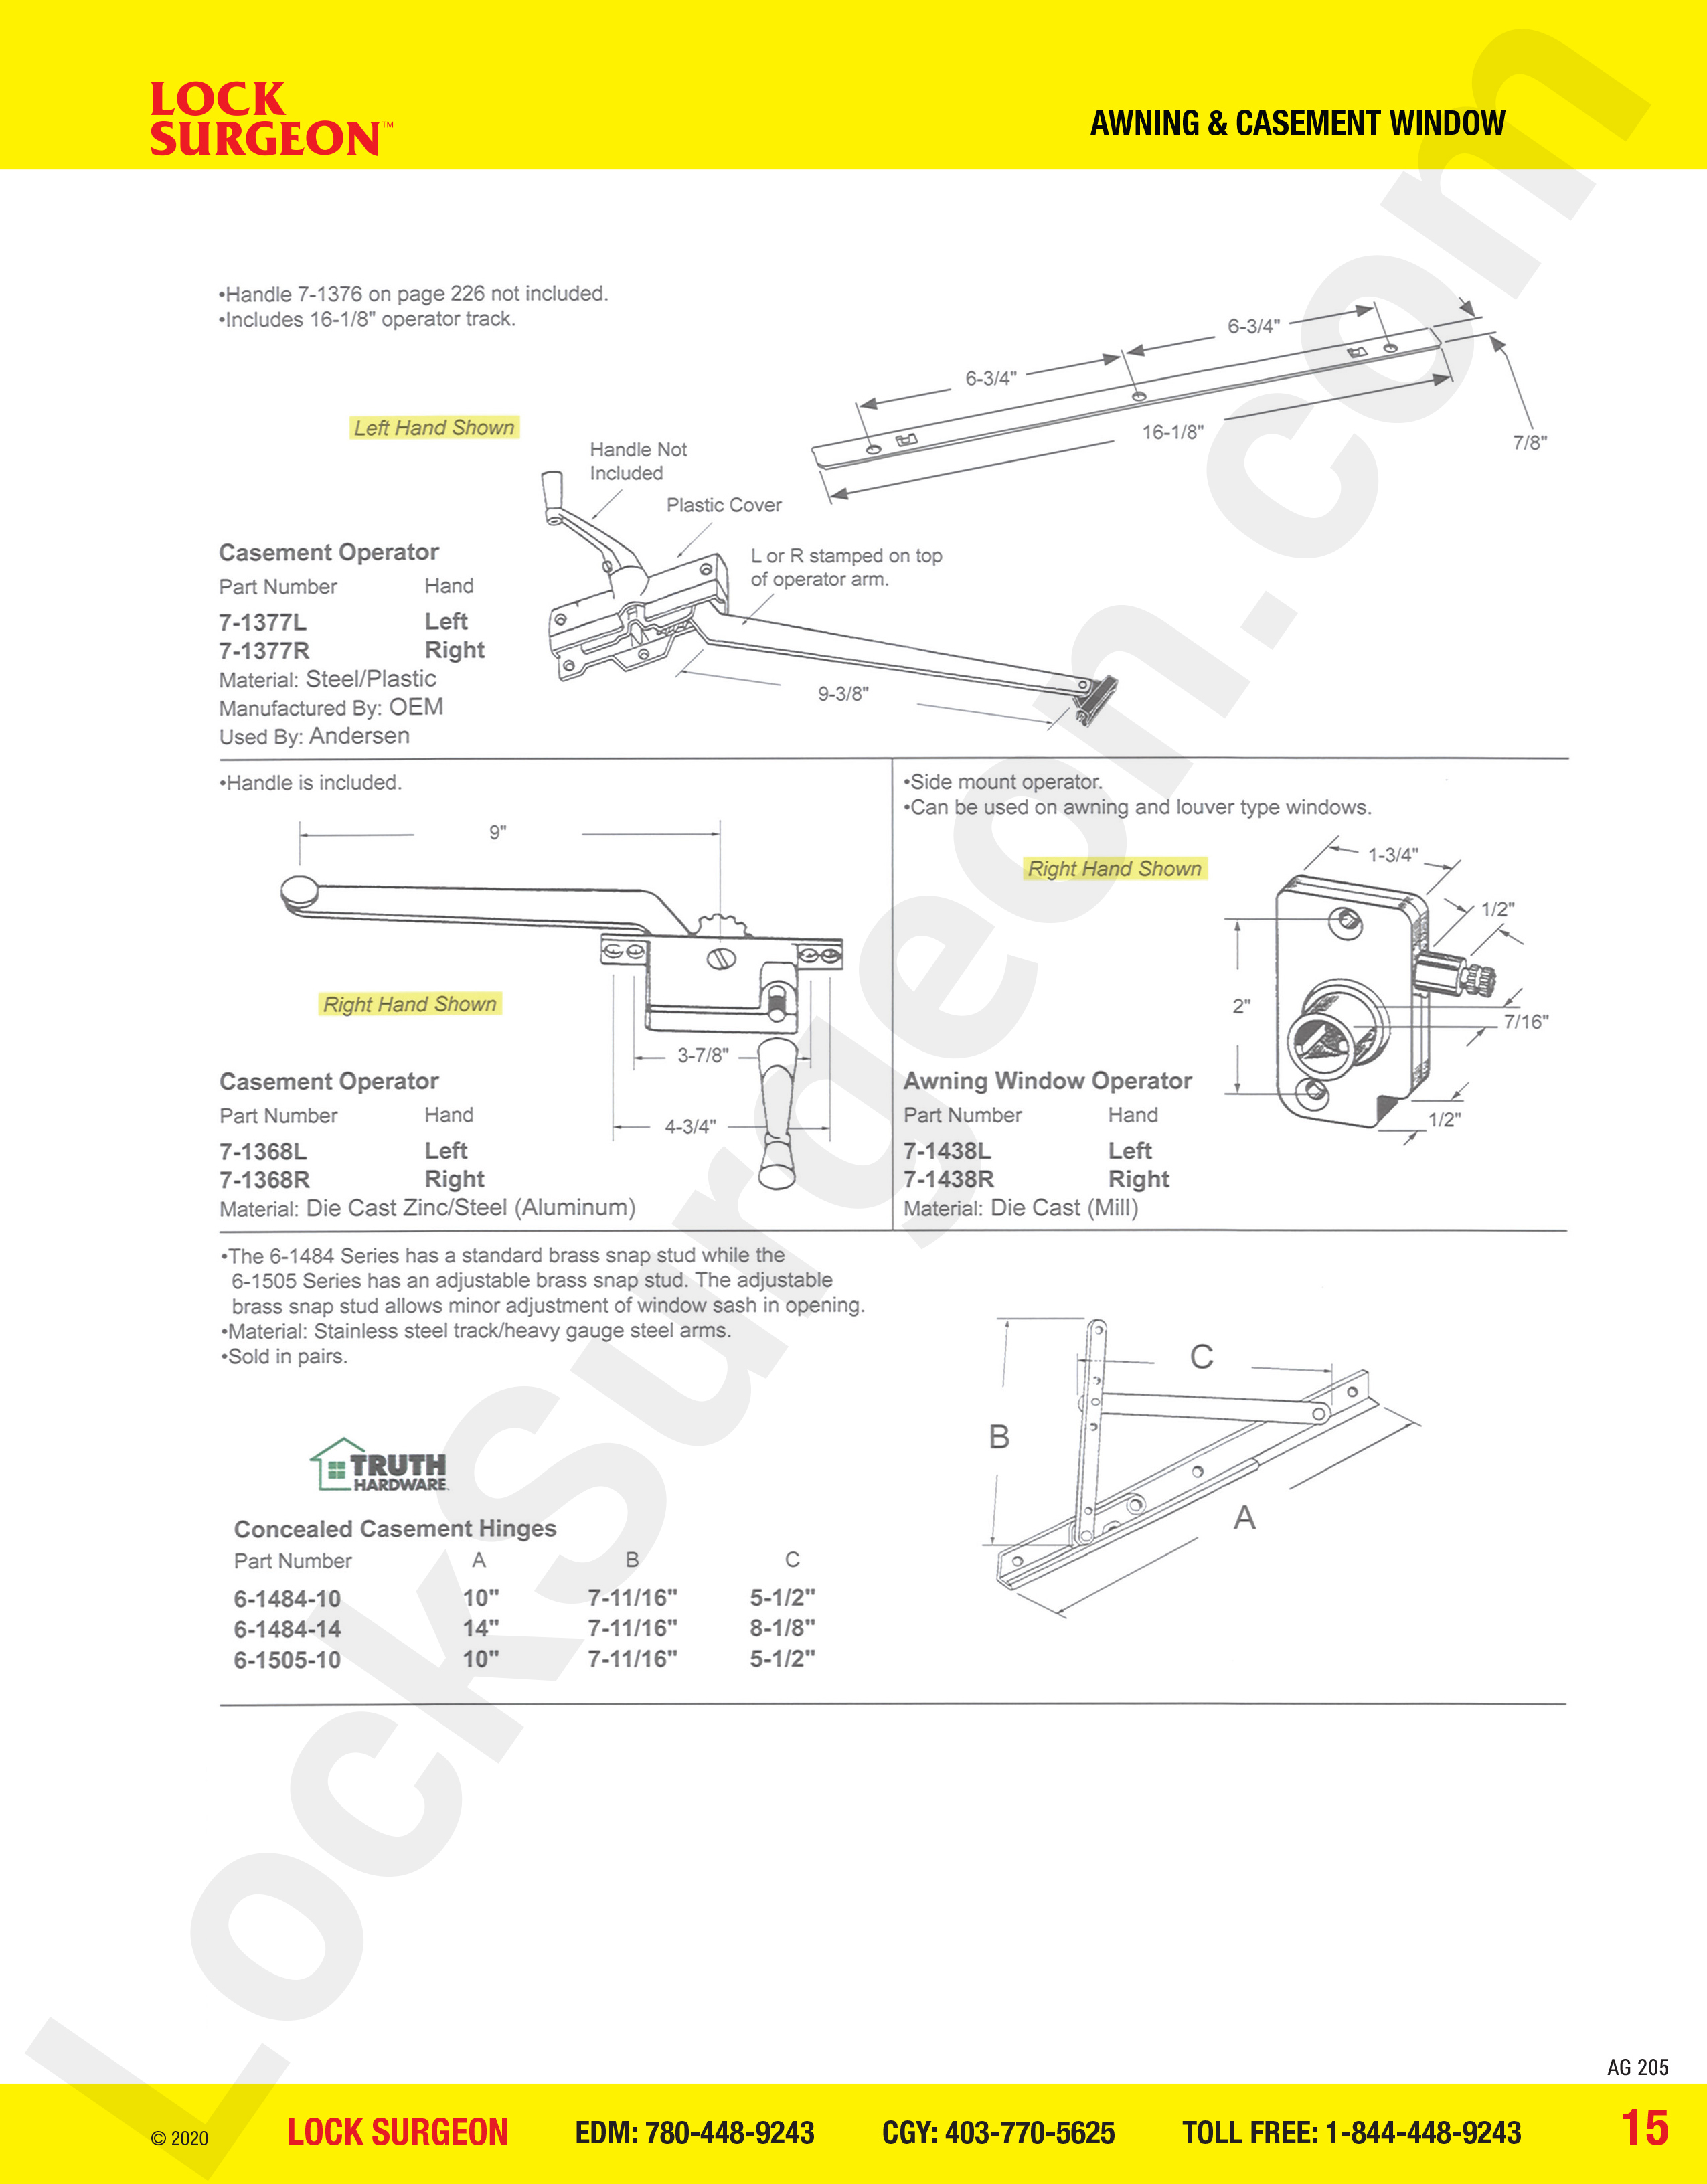 awning and casement window parts for operators